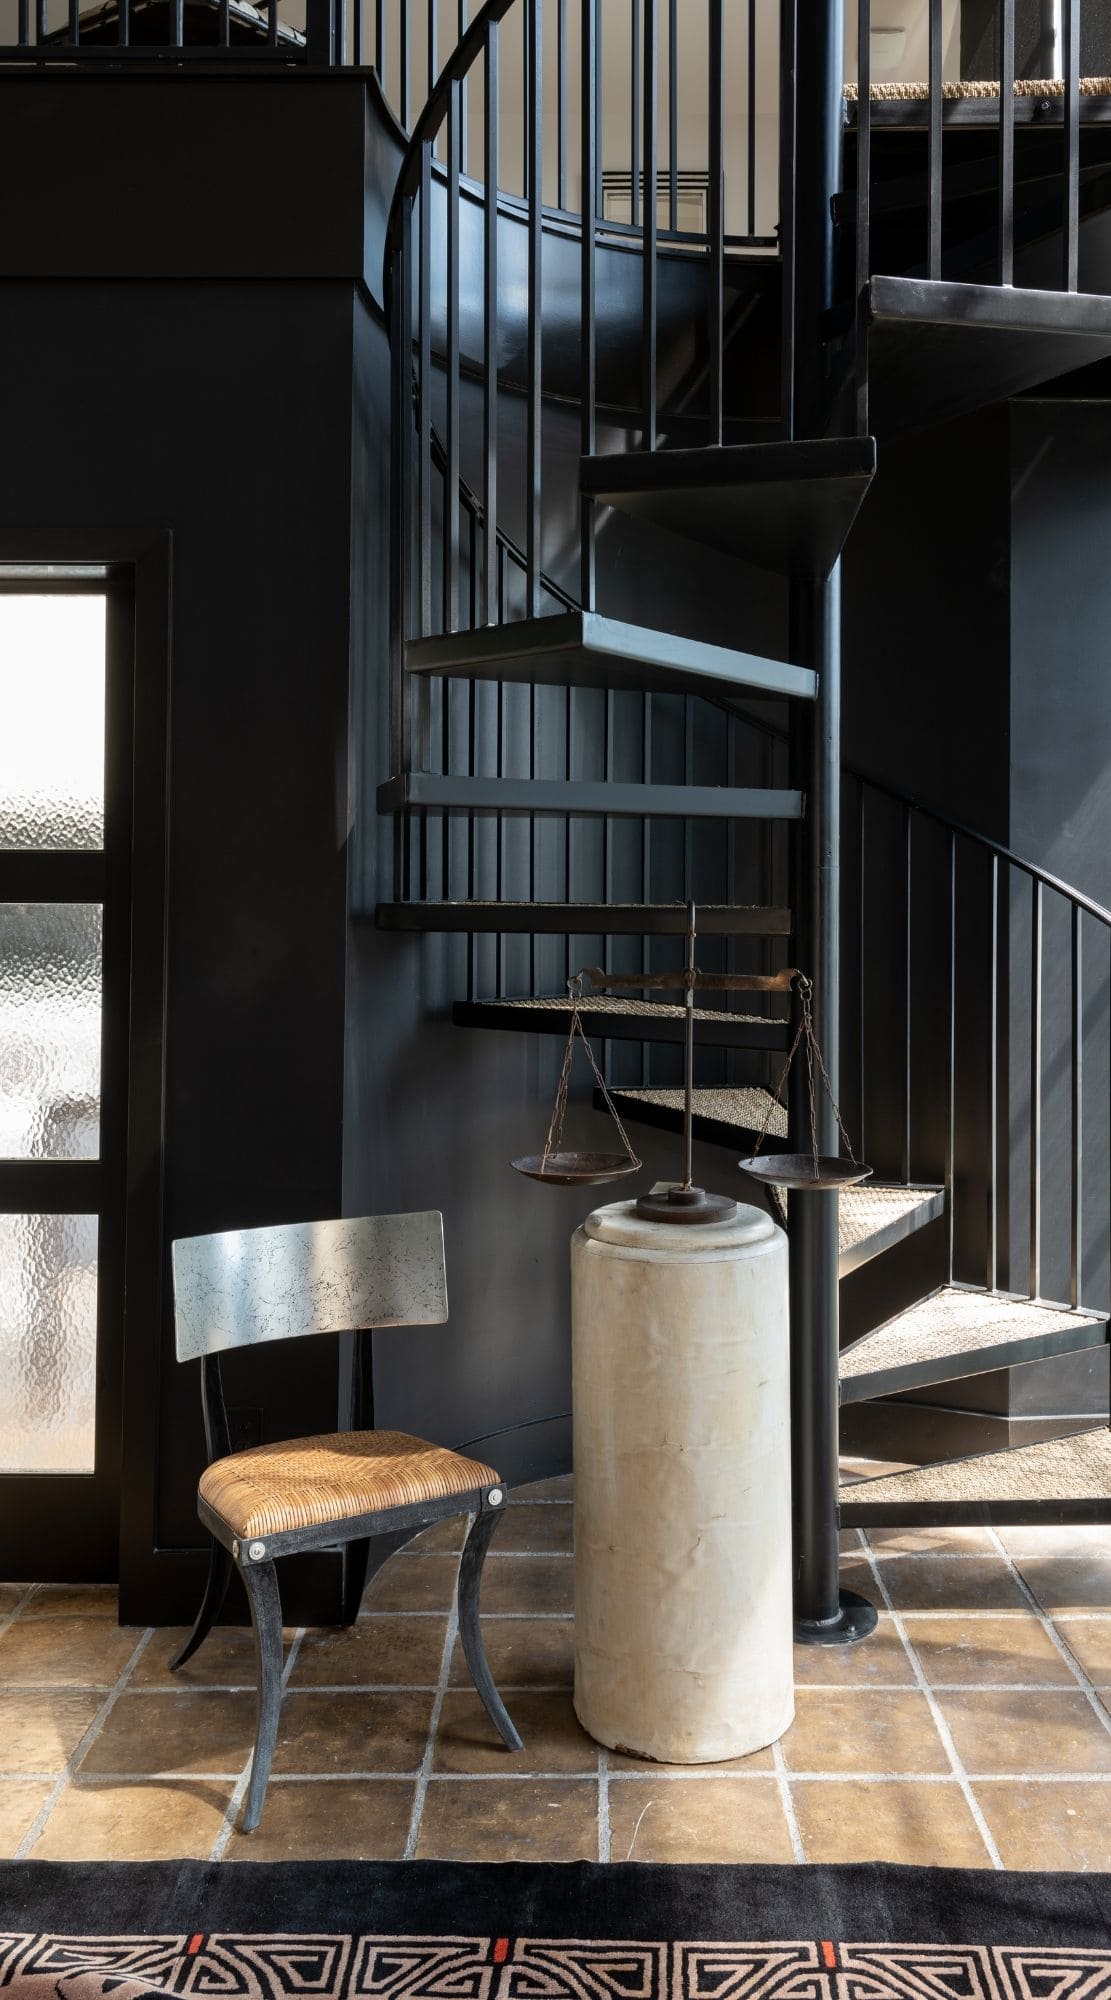 A spiral iron staircase winds towards the landing which features frosted doors that conceal a vibrant play room